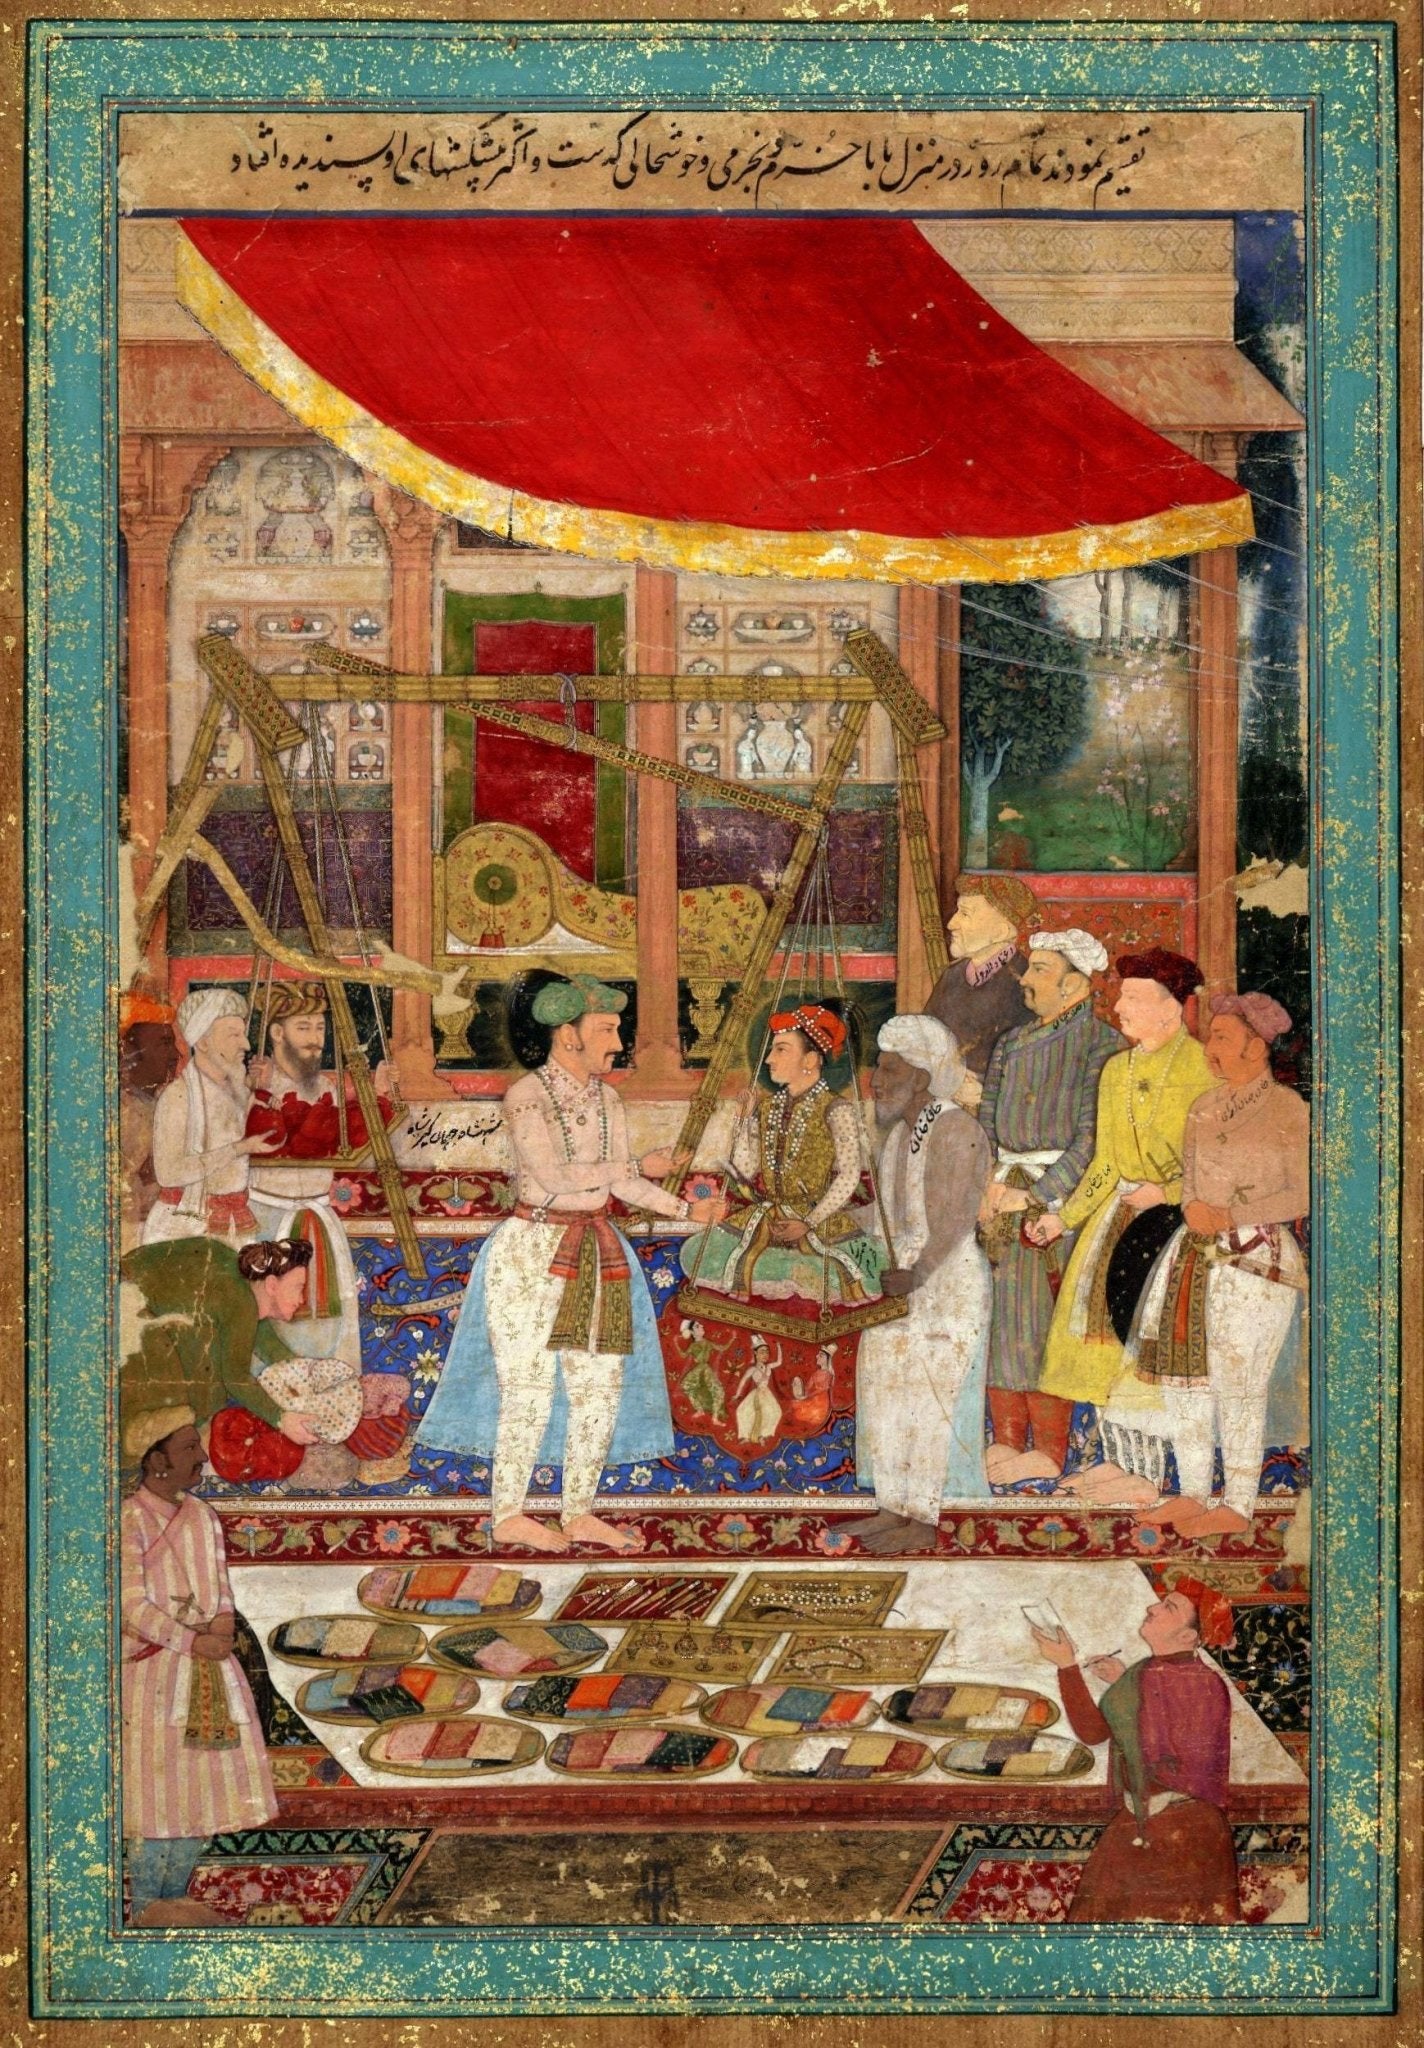 Emperor Jahangir and Khurram by Manohar (Traditional Indo Persian Miniature Art)